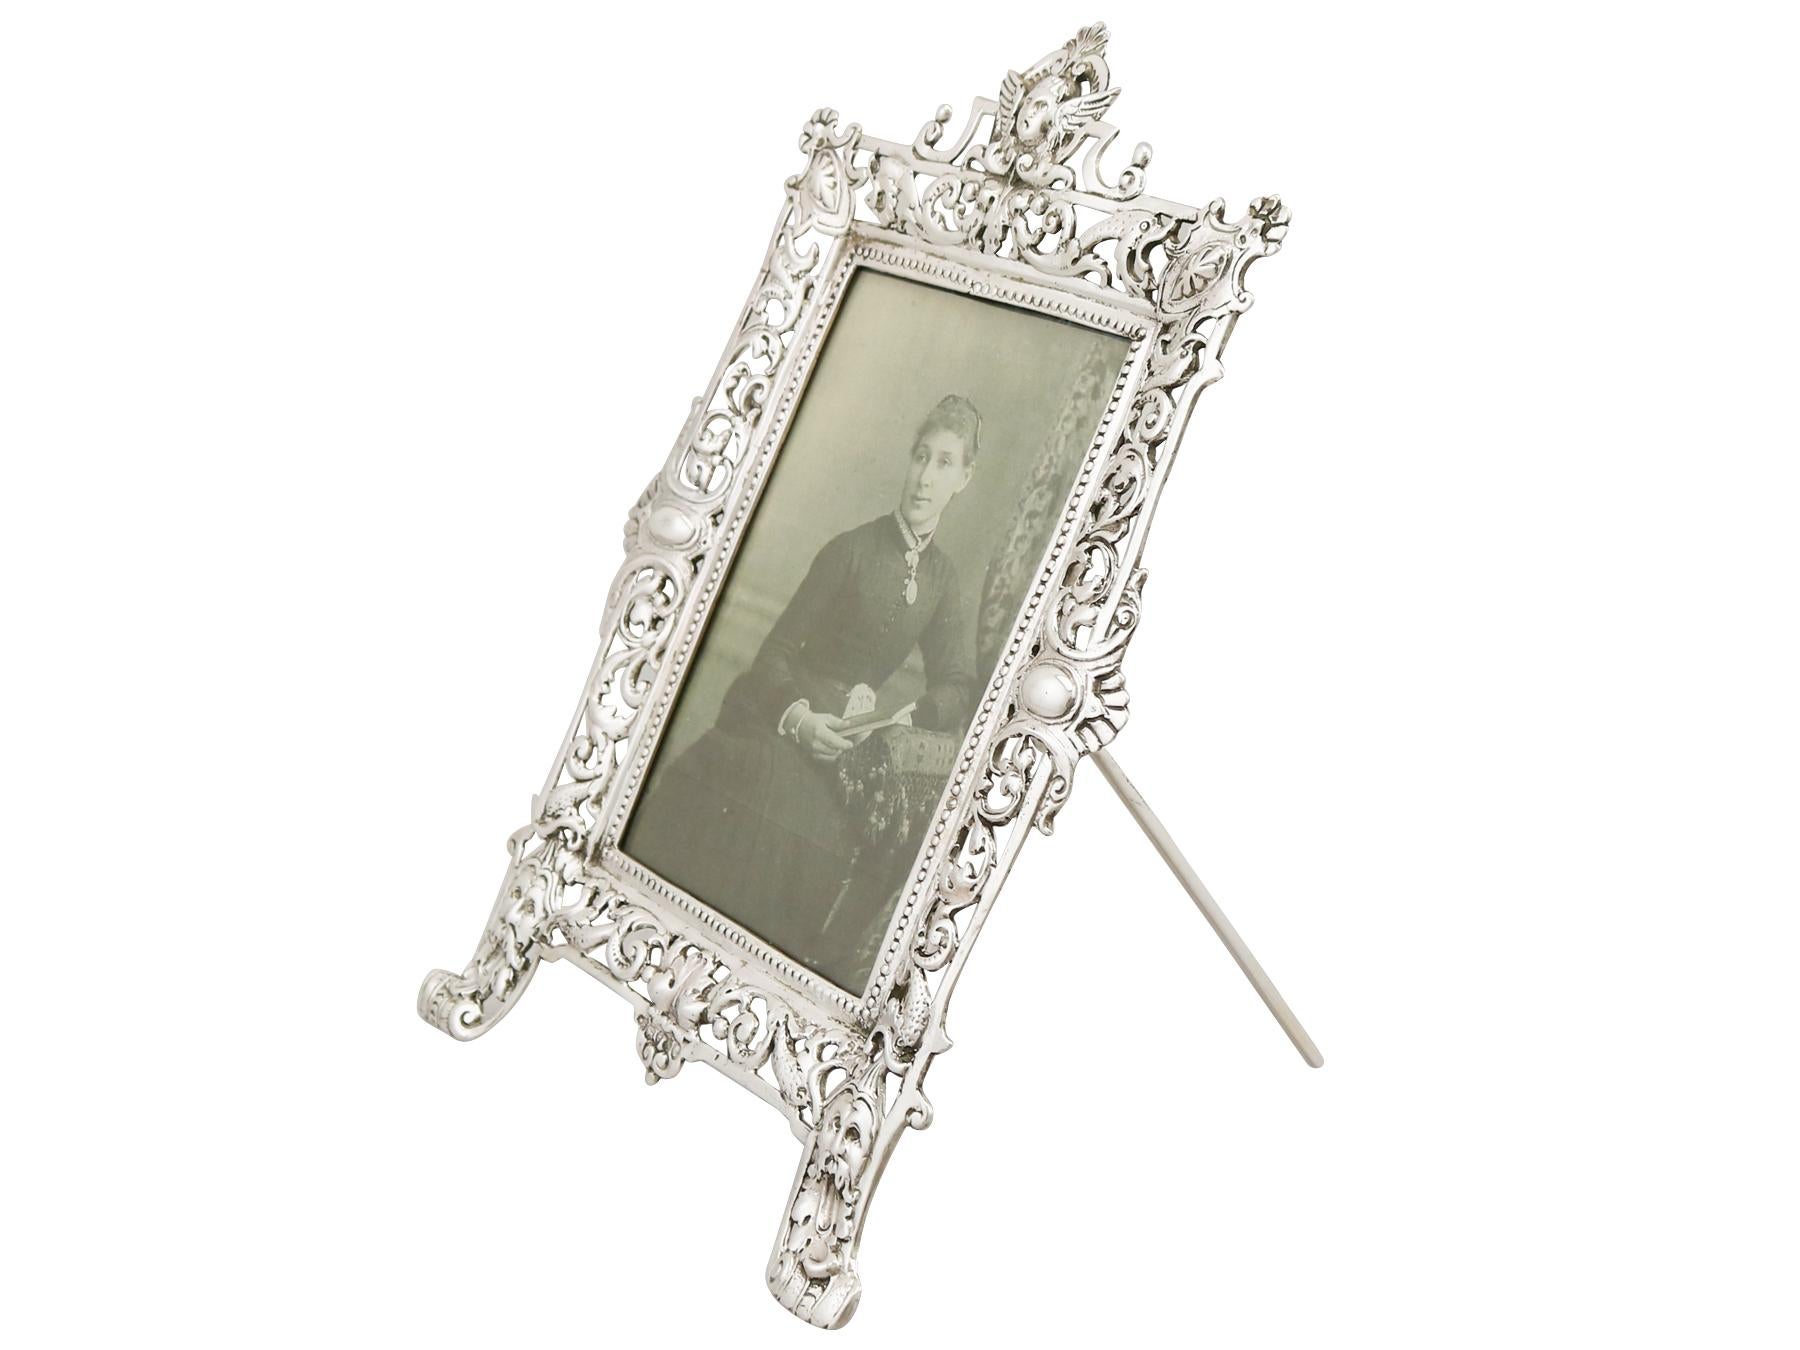 British Antique Victorian Sterling Silver Photograph Frame, 1881